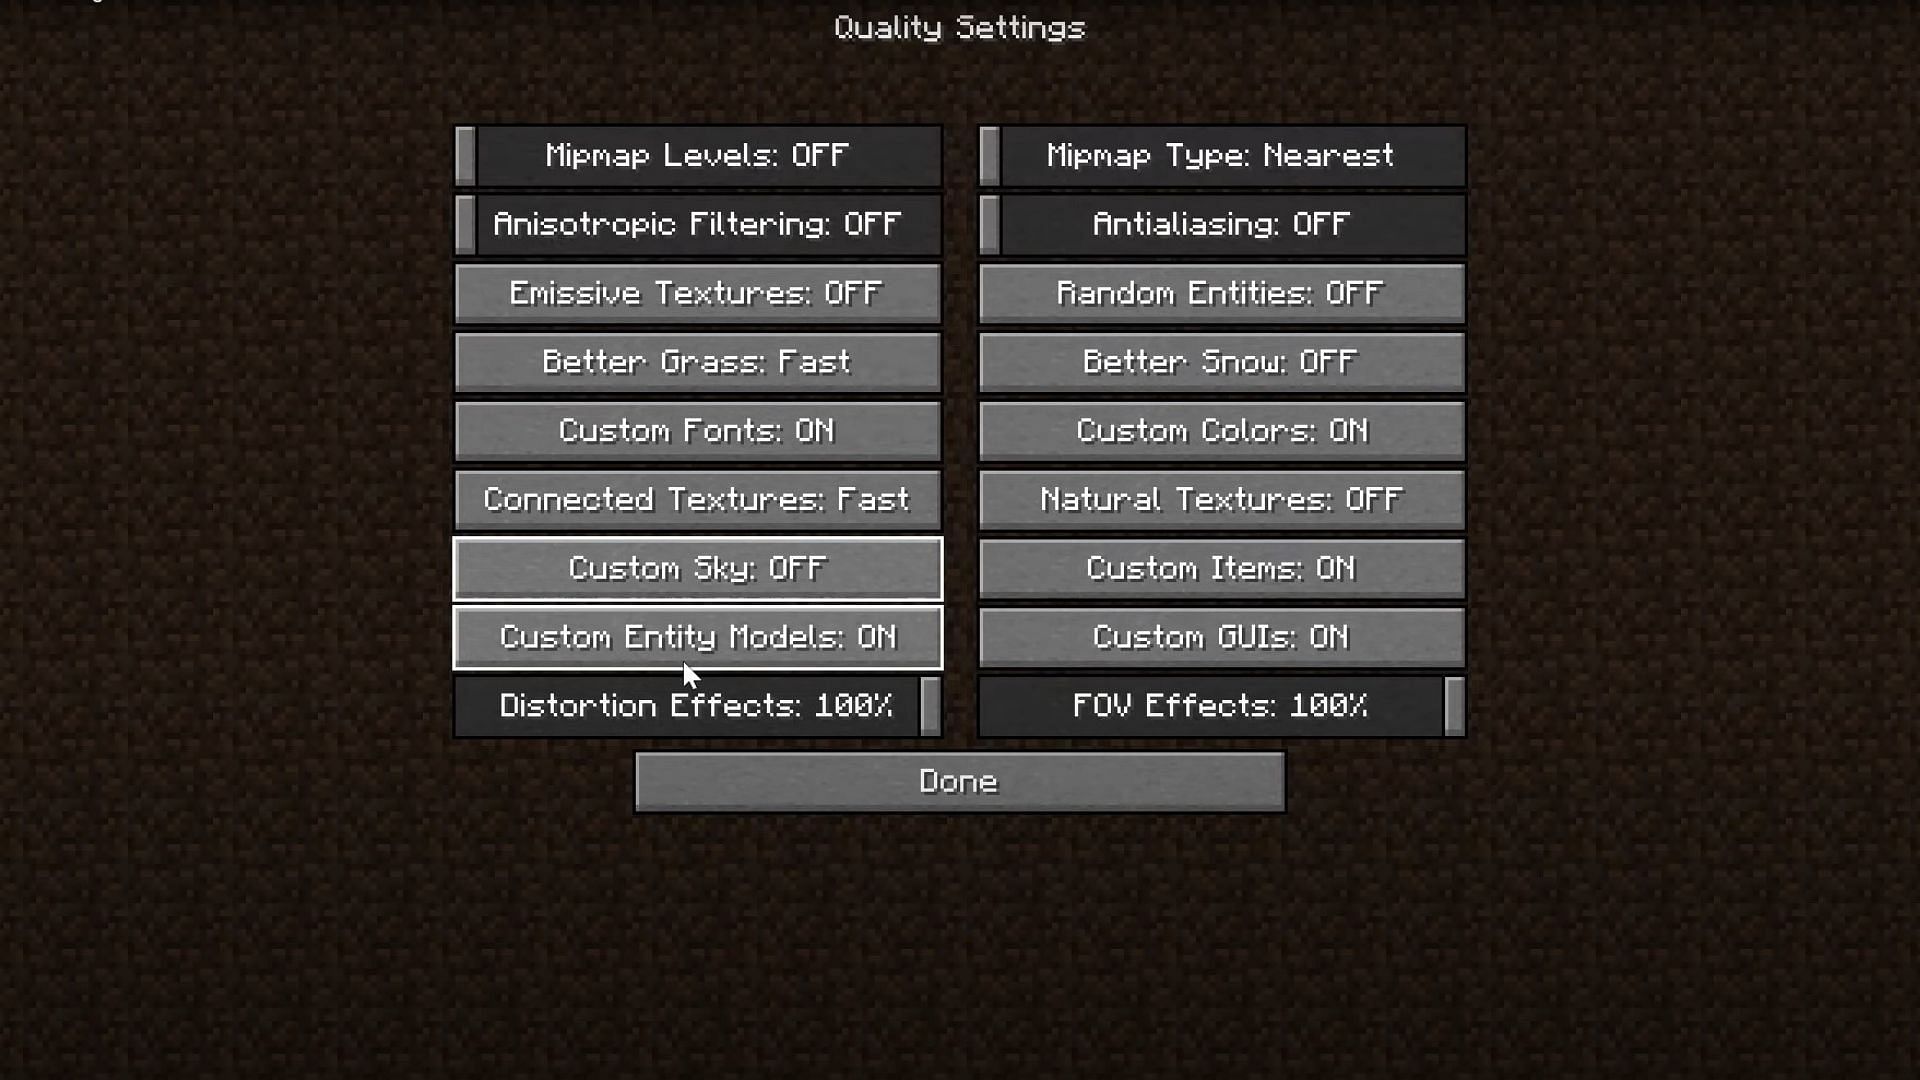 Quality Settings for Optifine Shaders (Image via The Breakdown)